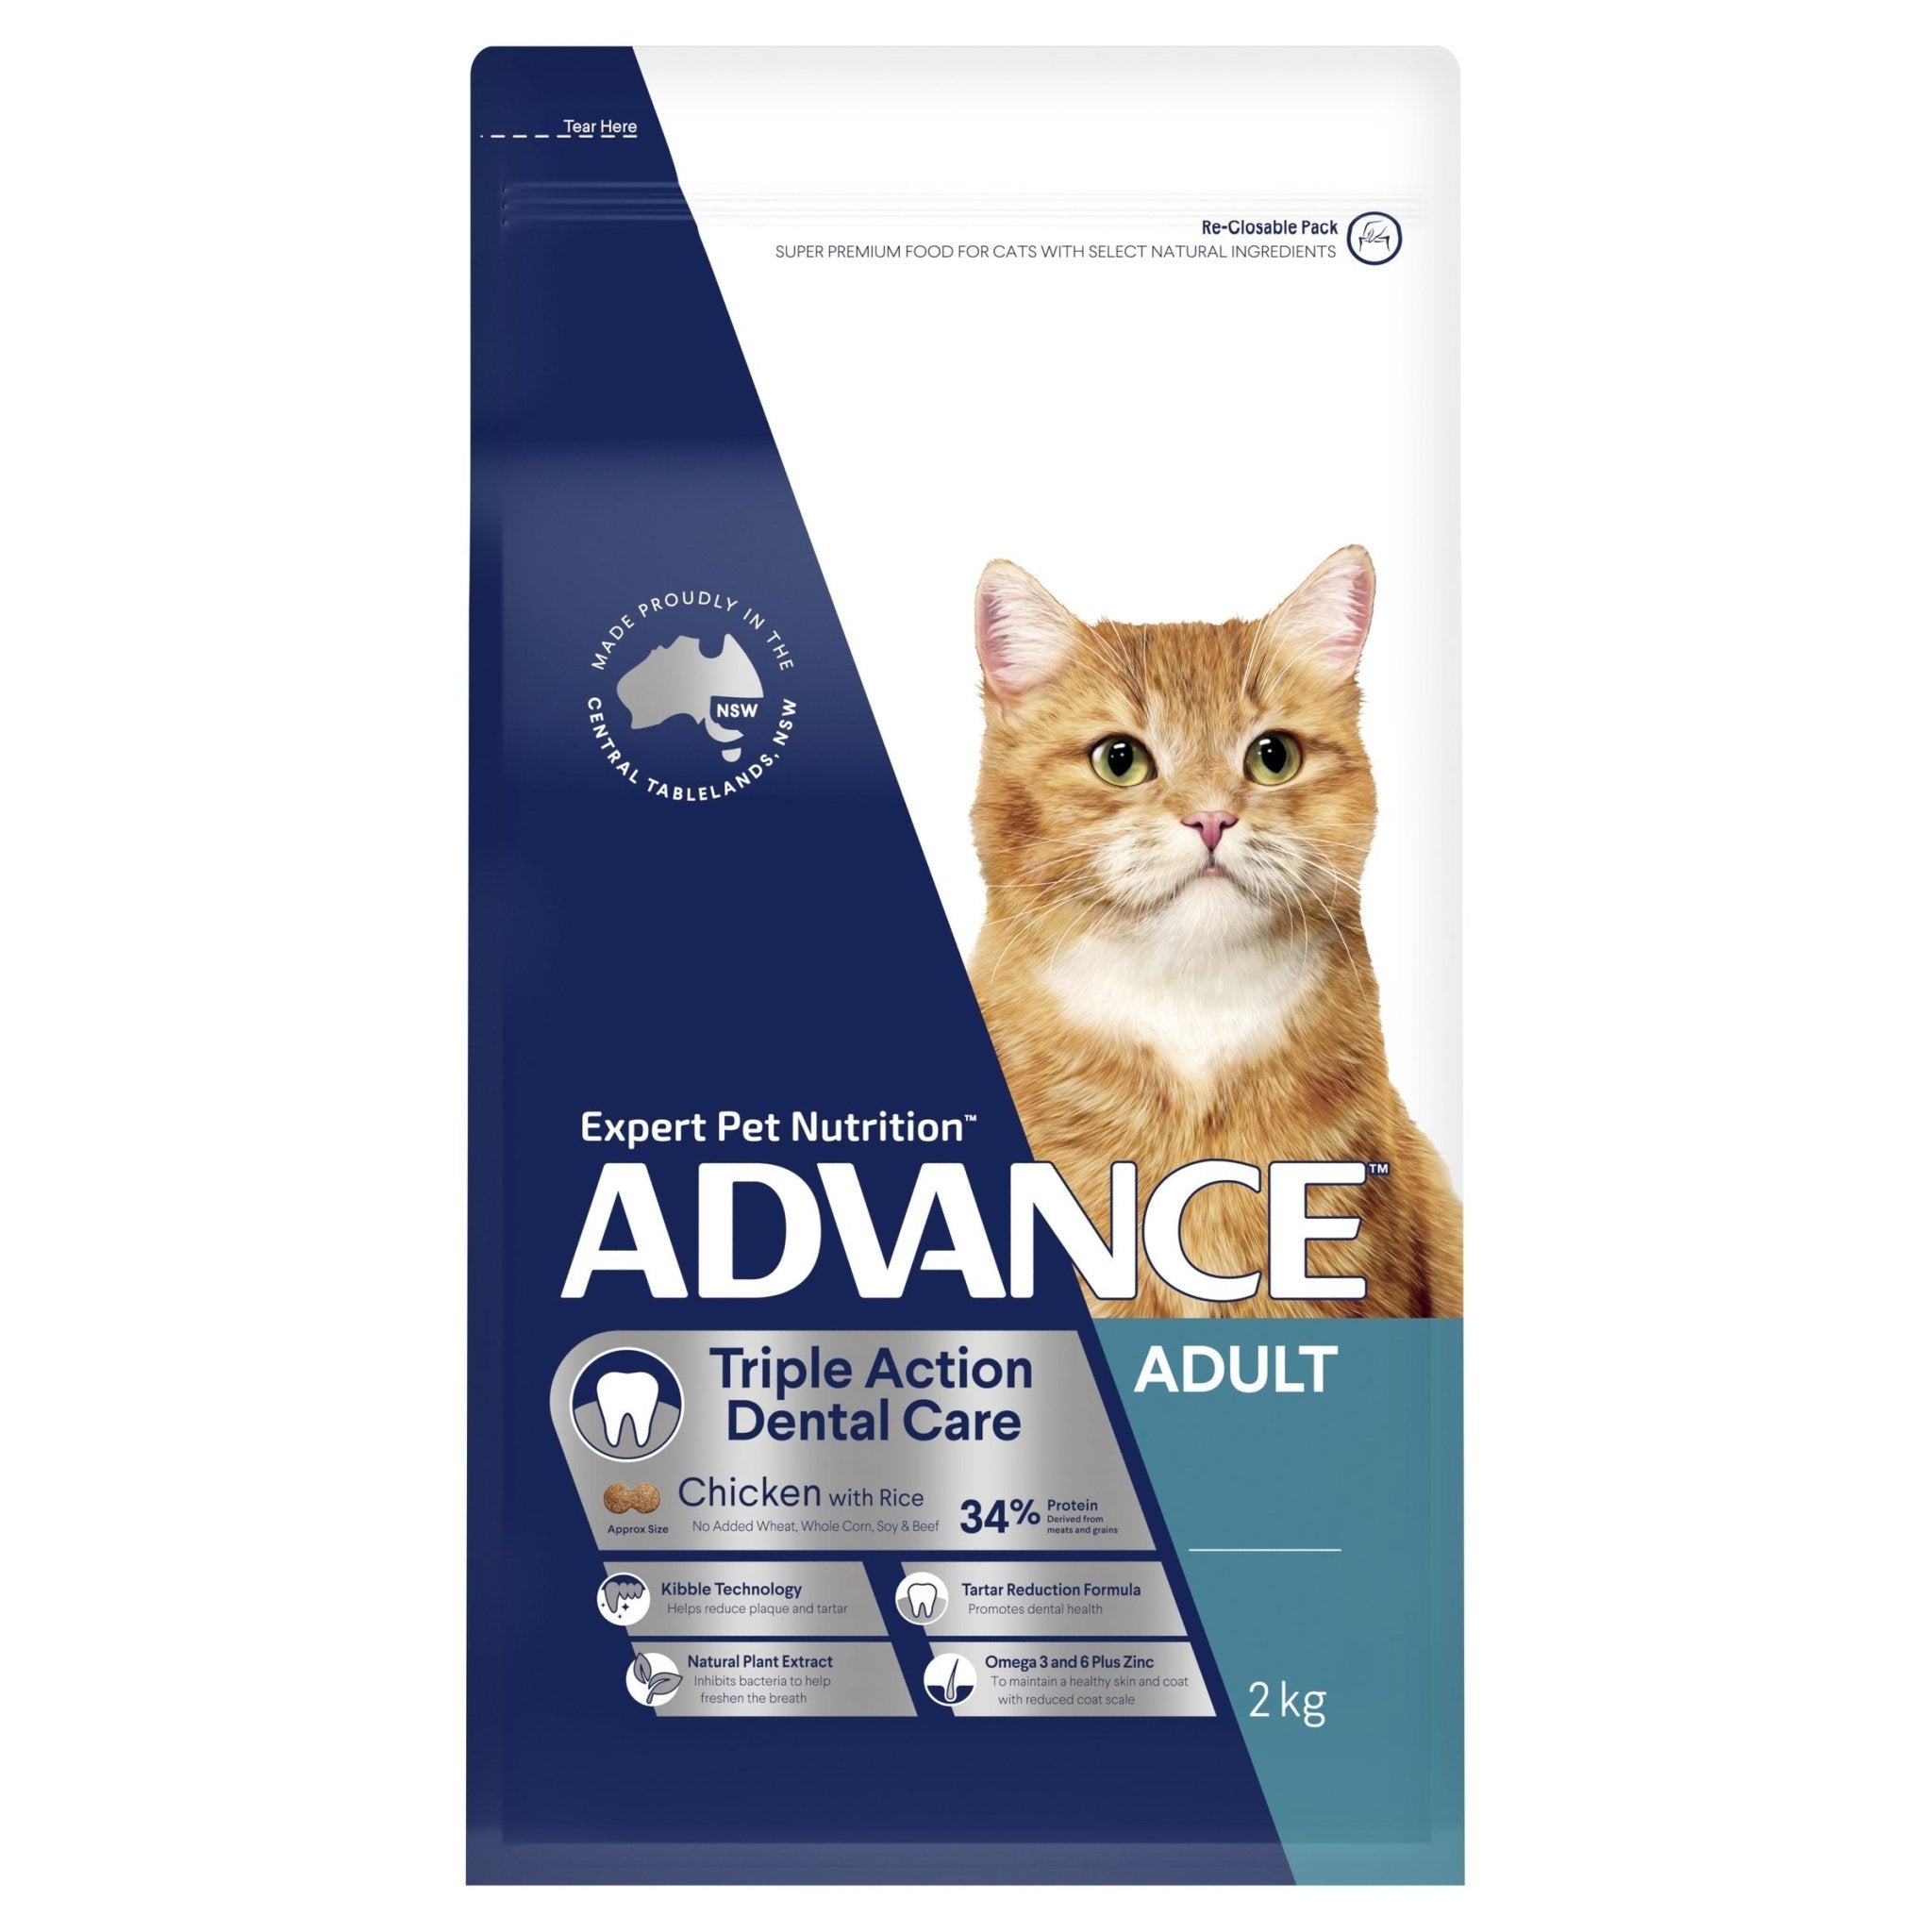 ADVANCE Triple Action Dental Care Dry Cat Food Chicken with Rice 2kg Bag